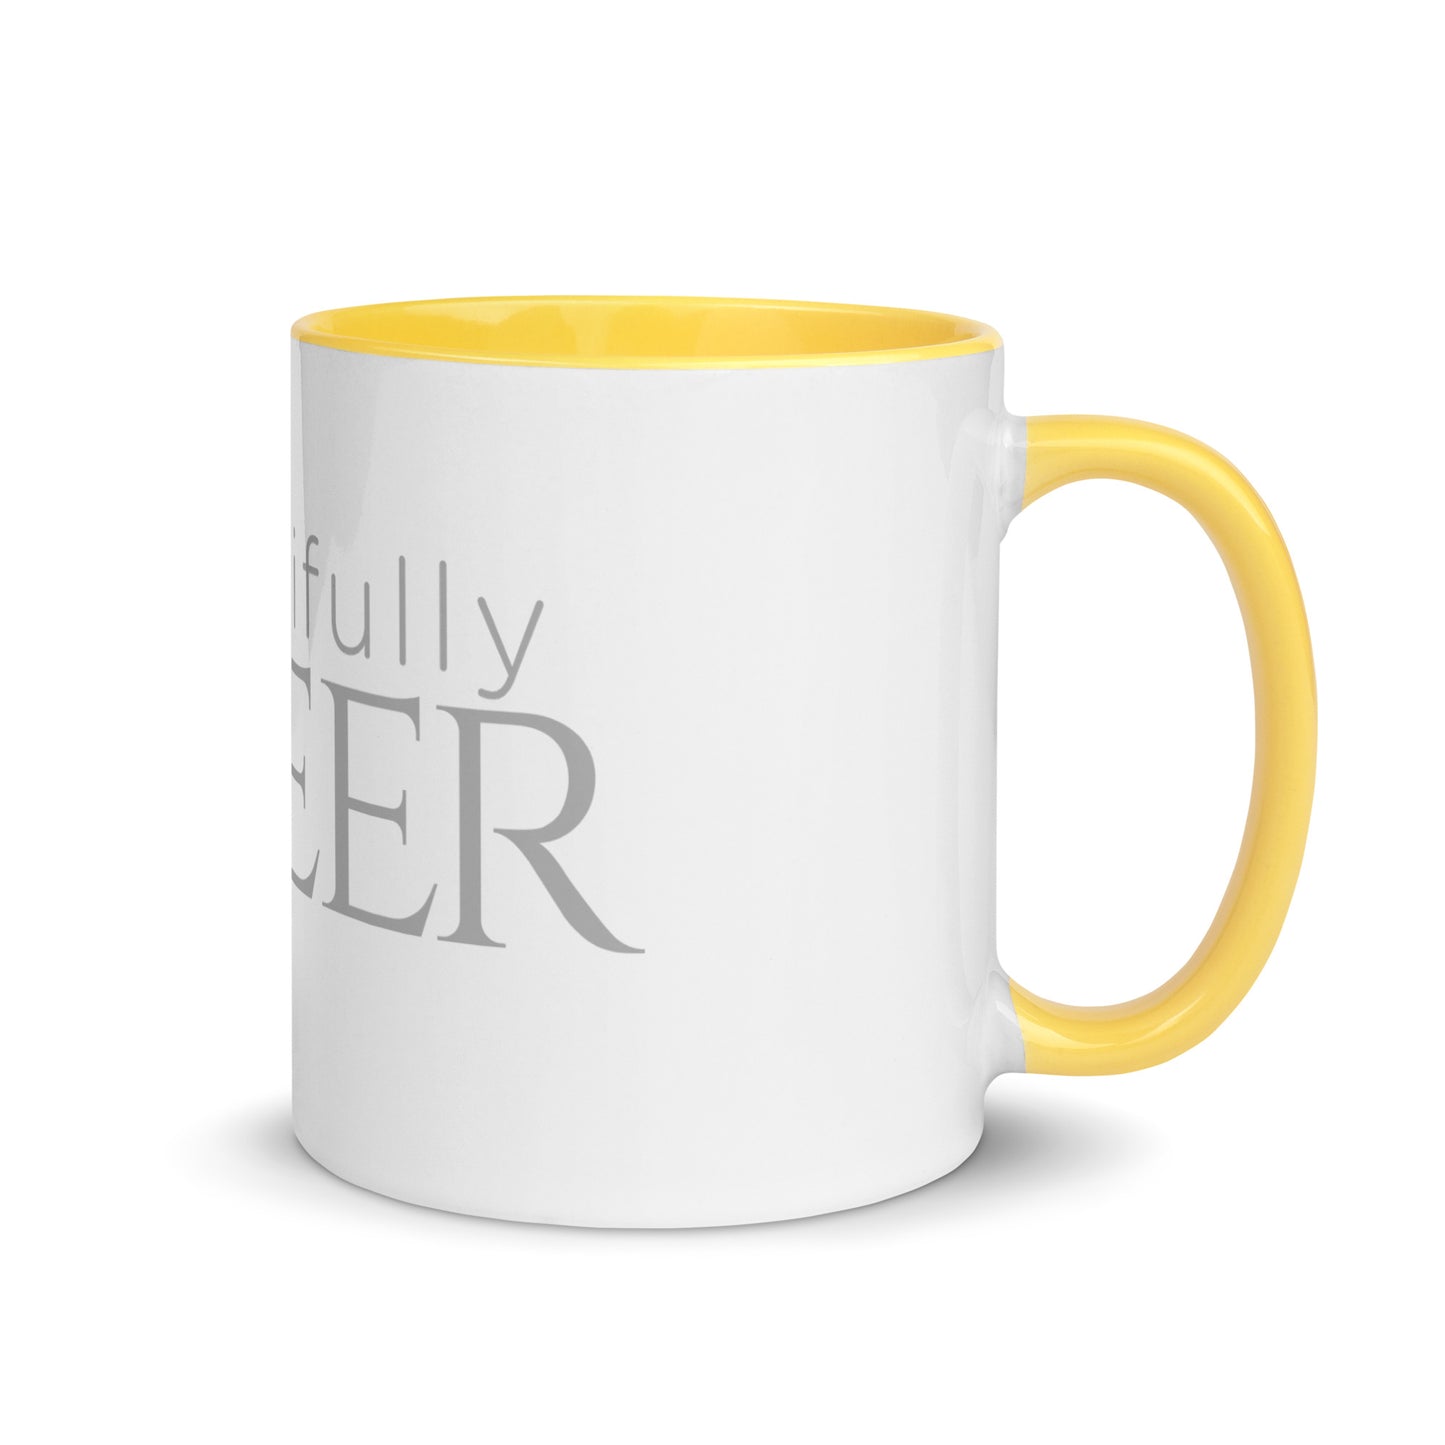 BEAUTIFULLY QUEER Mug with COLOR Inside(SEE ALL OPTIONS)